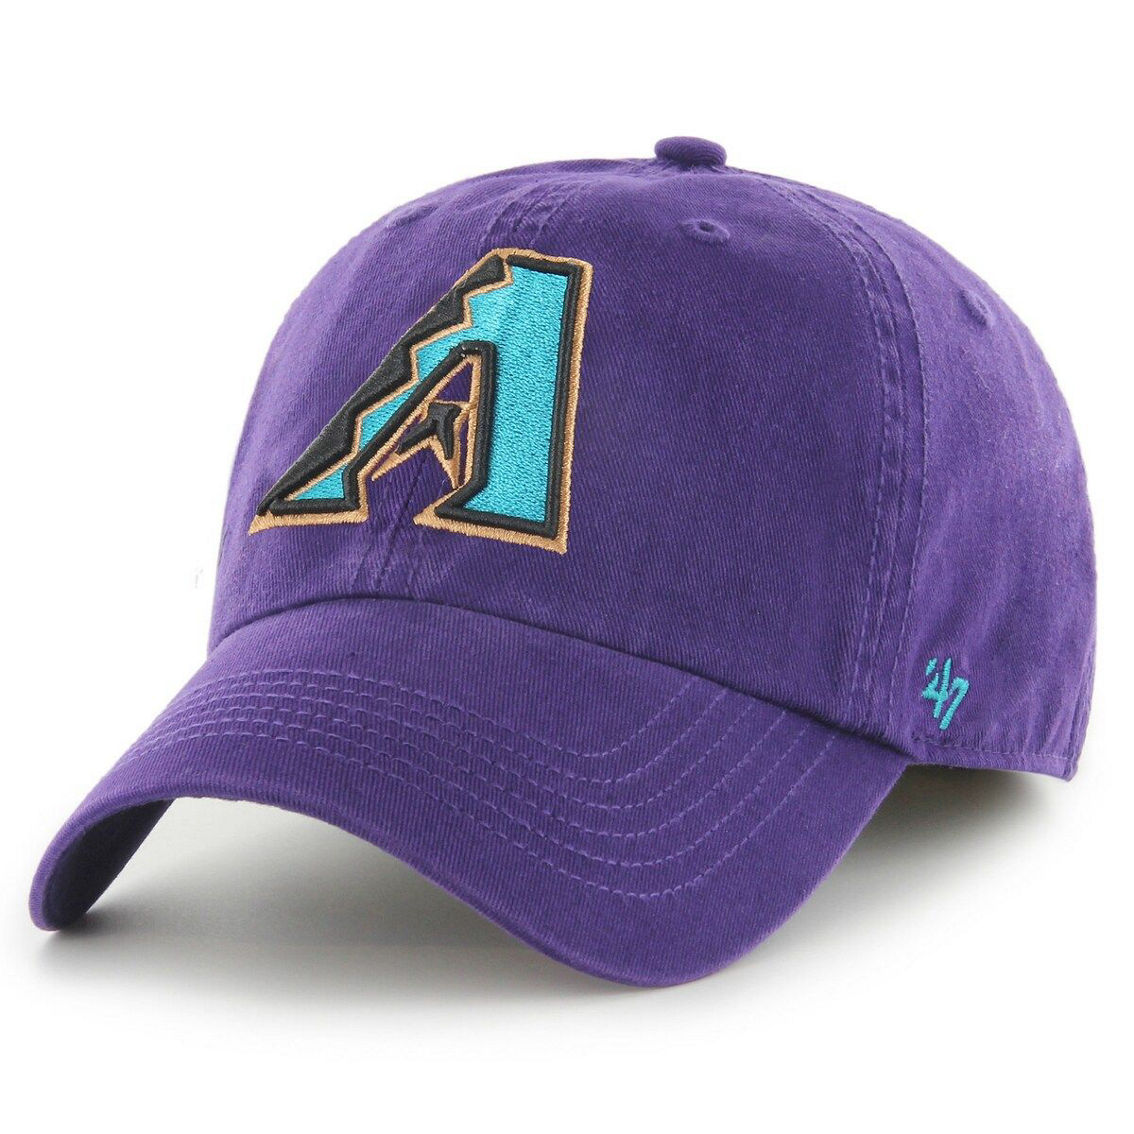 '47 Men's Purple Arizona Diamondbacks Cooperstown Collection Franchise Fitted Hat - Image 2 of 3